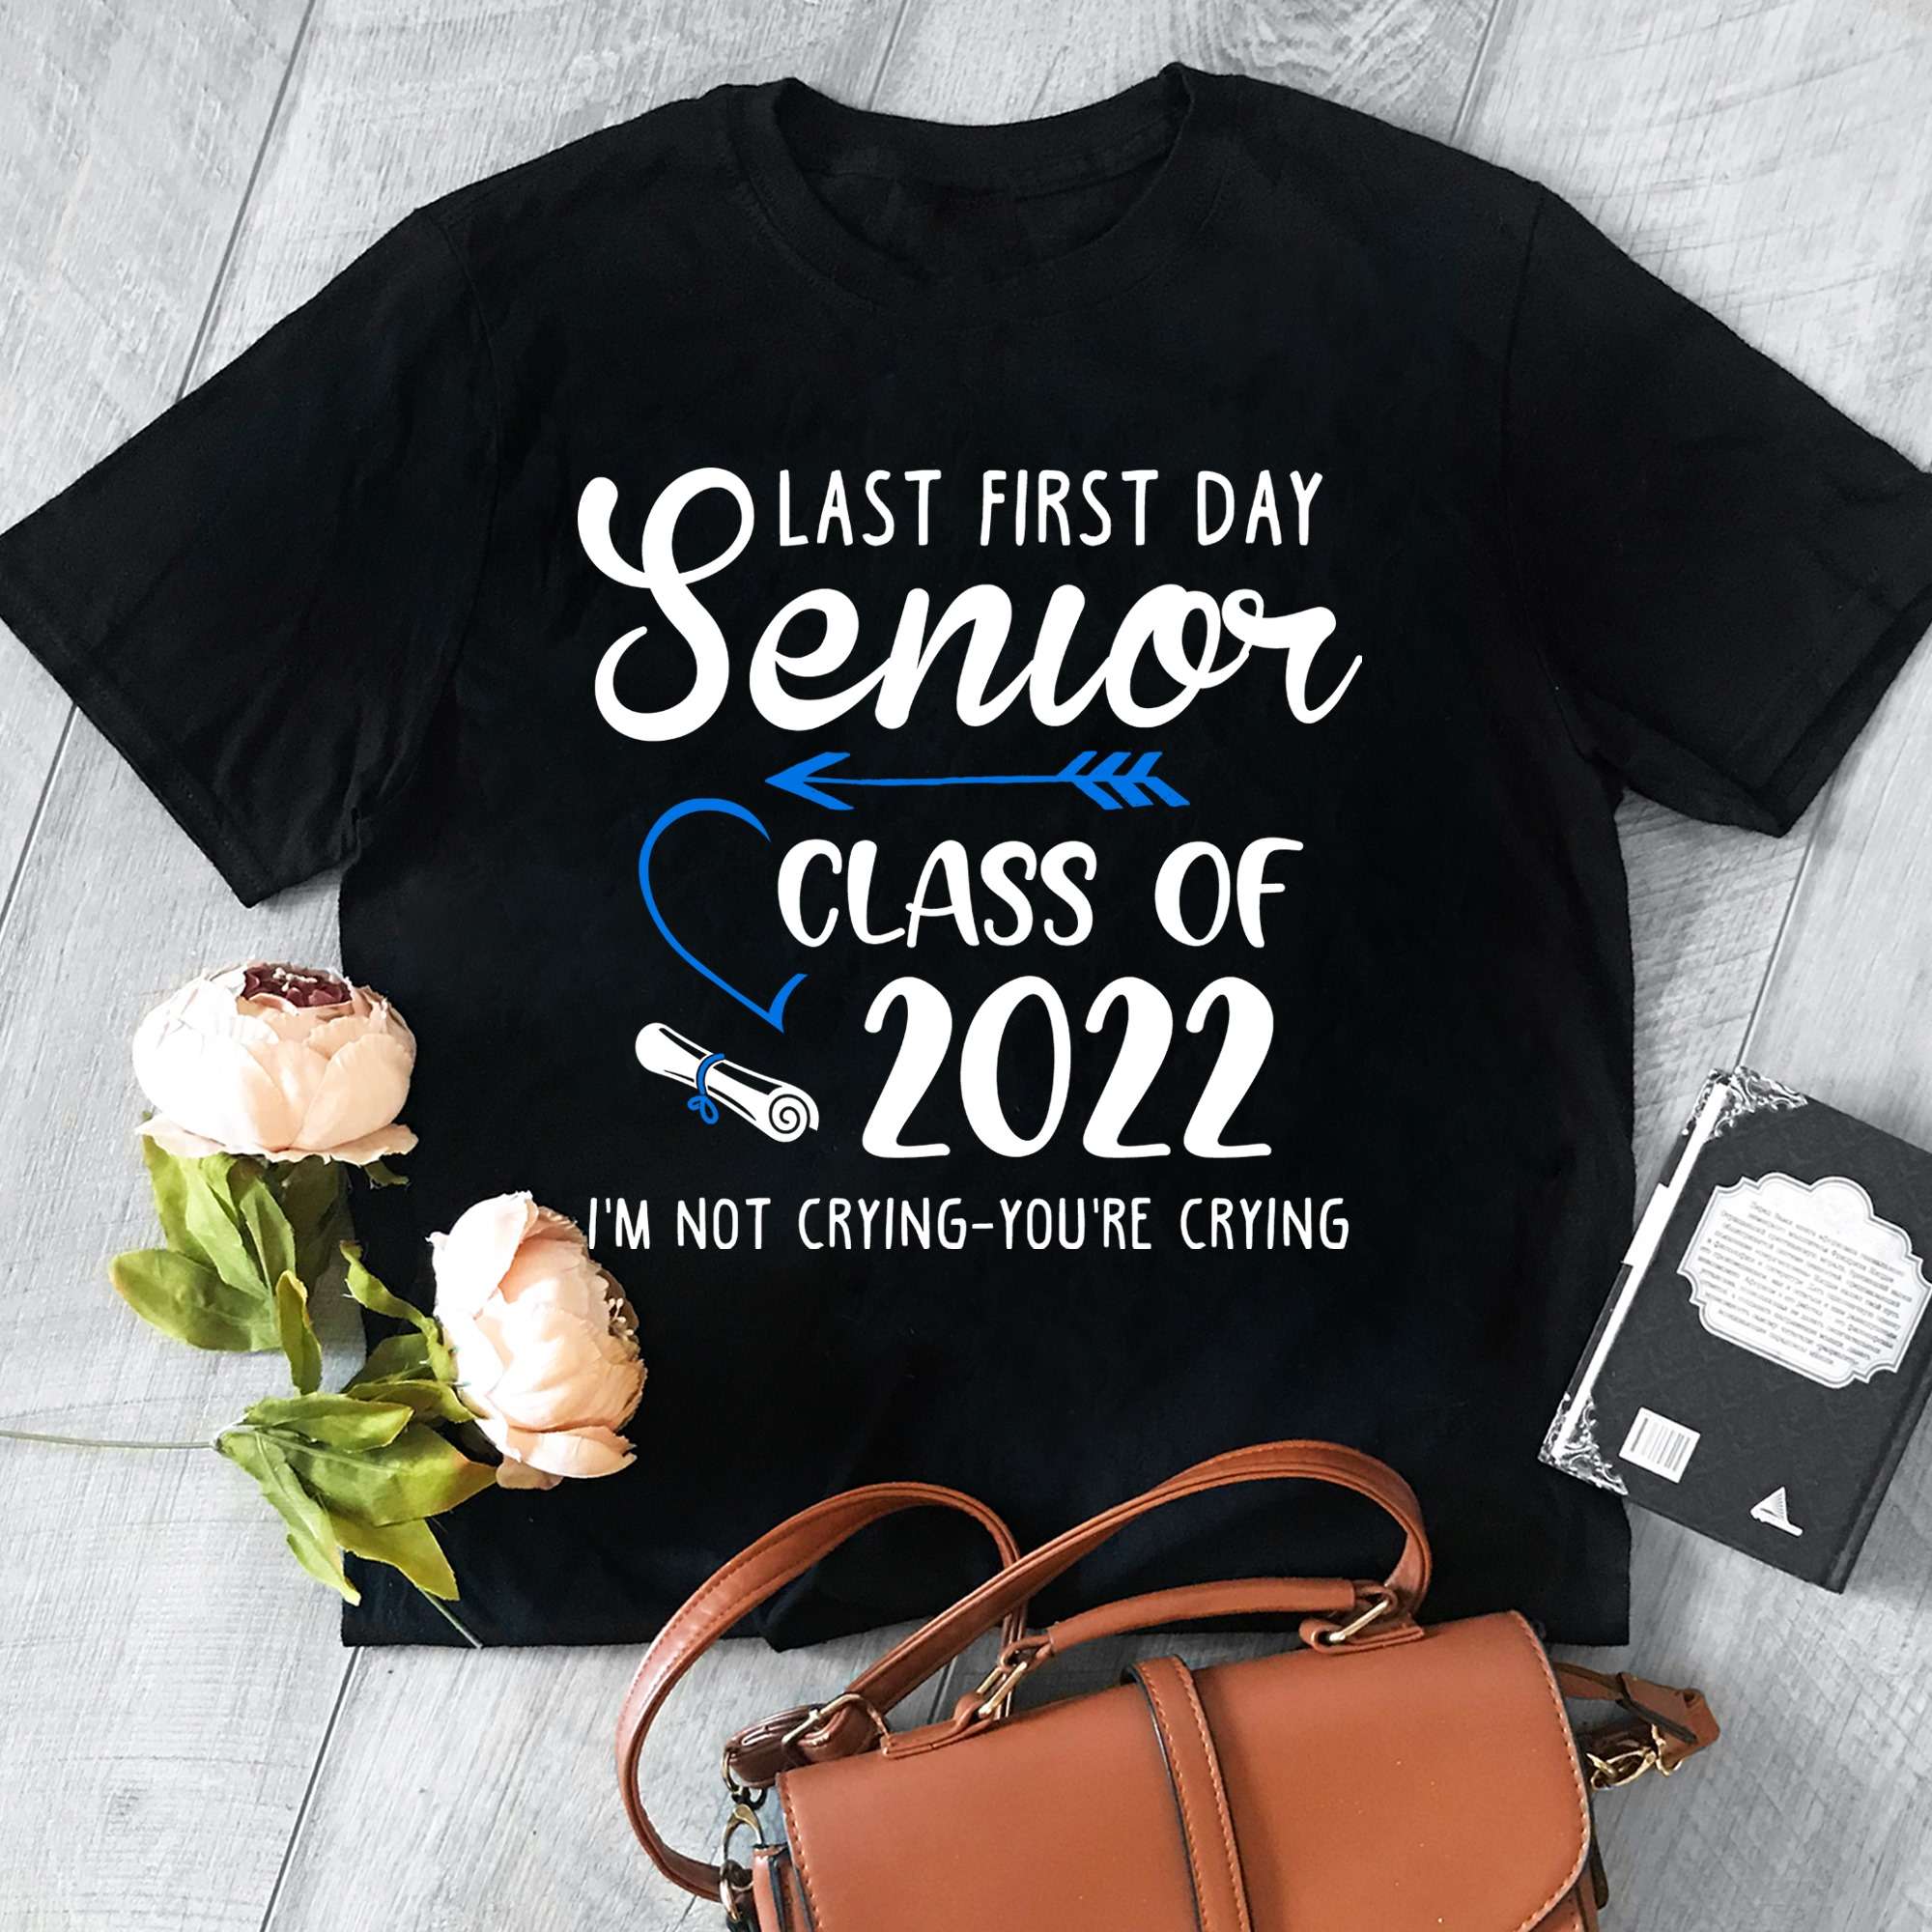 Last first day senior class of 2022 I'm not crying, you're crying - Student 2022